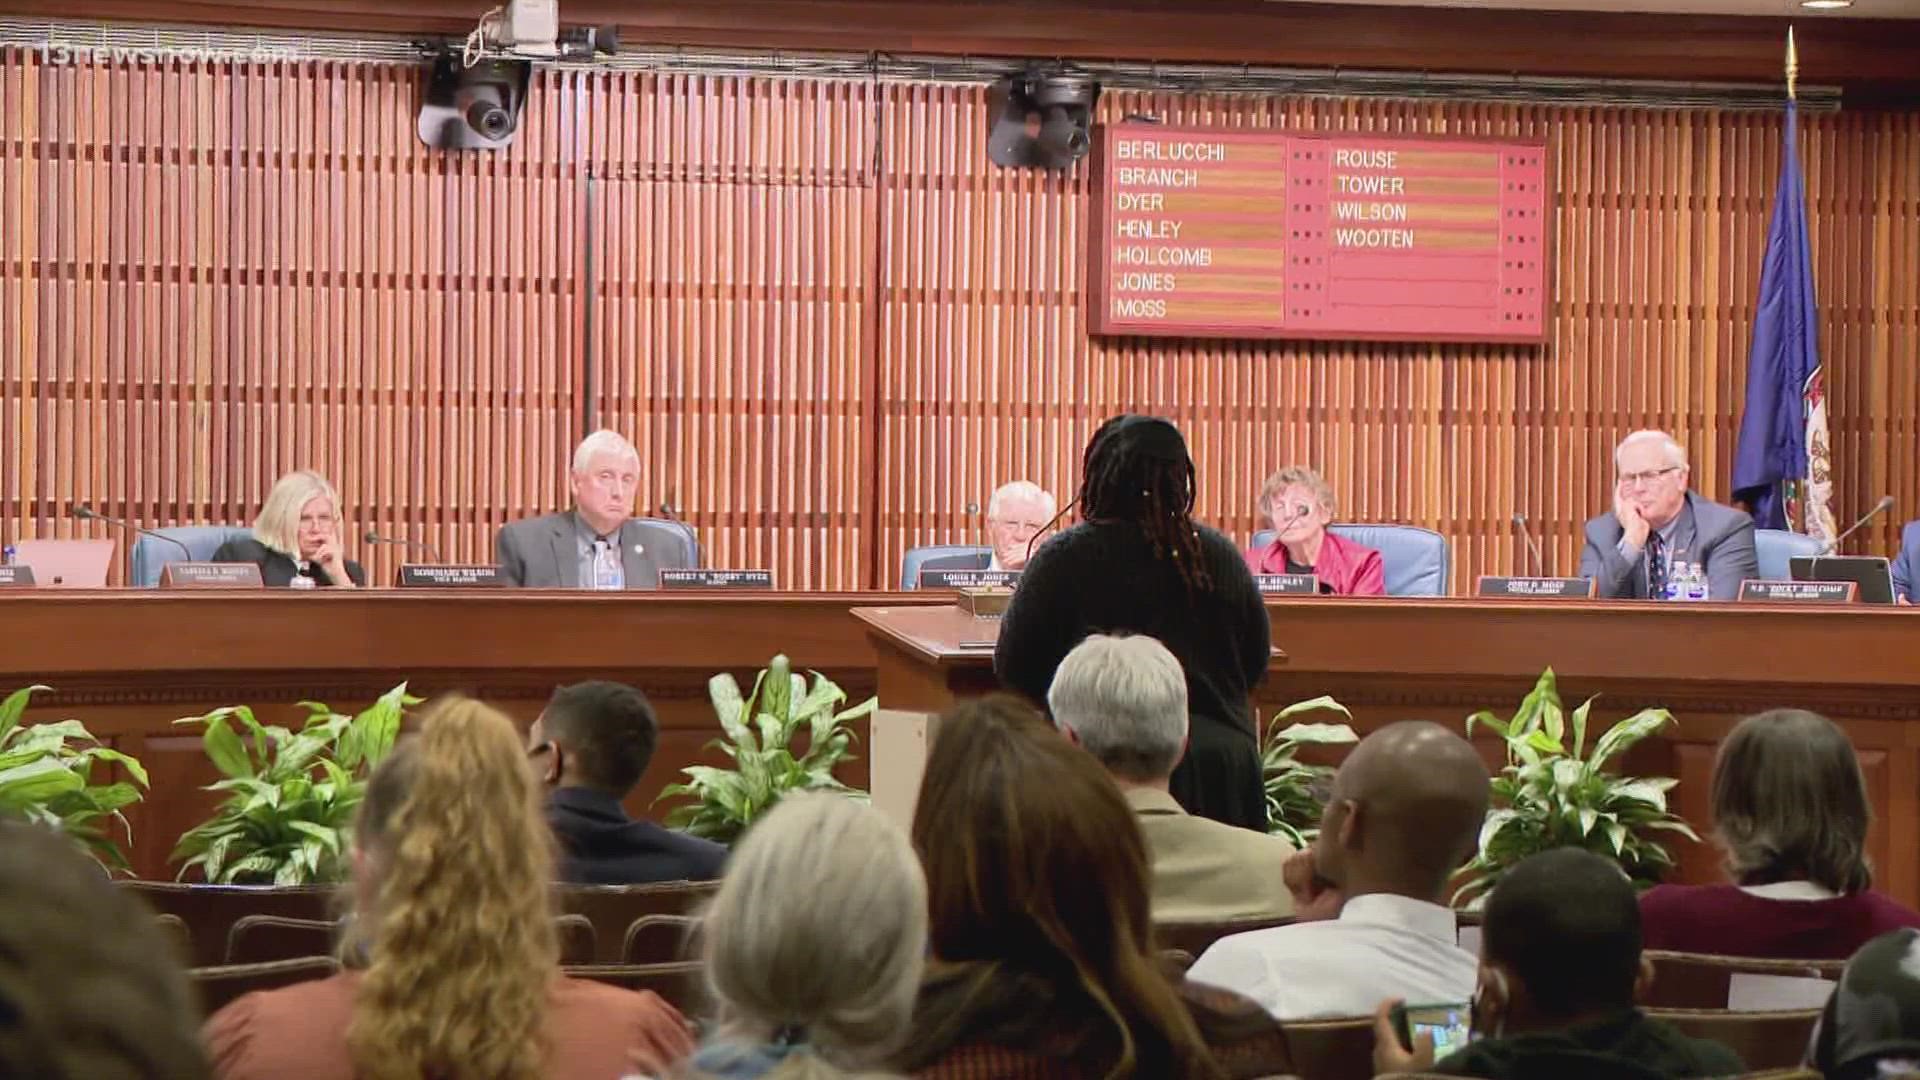 City Council voted on creating two memorials to remember victims of gun violence. They votes failed, but they did spark conversations on how to honor victims.